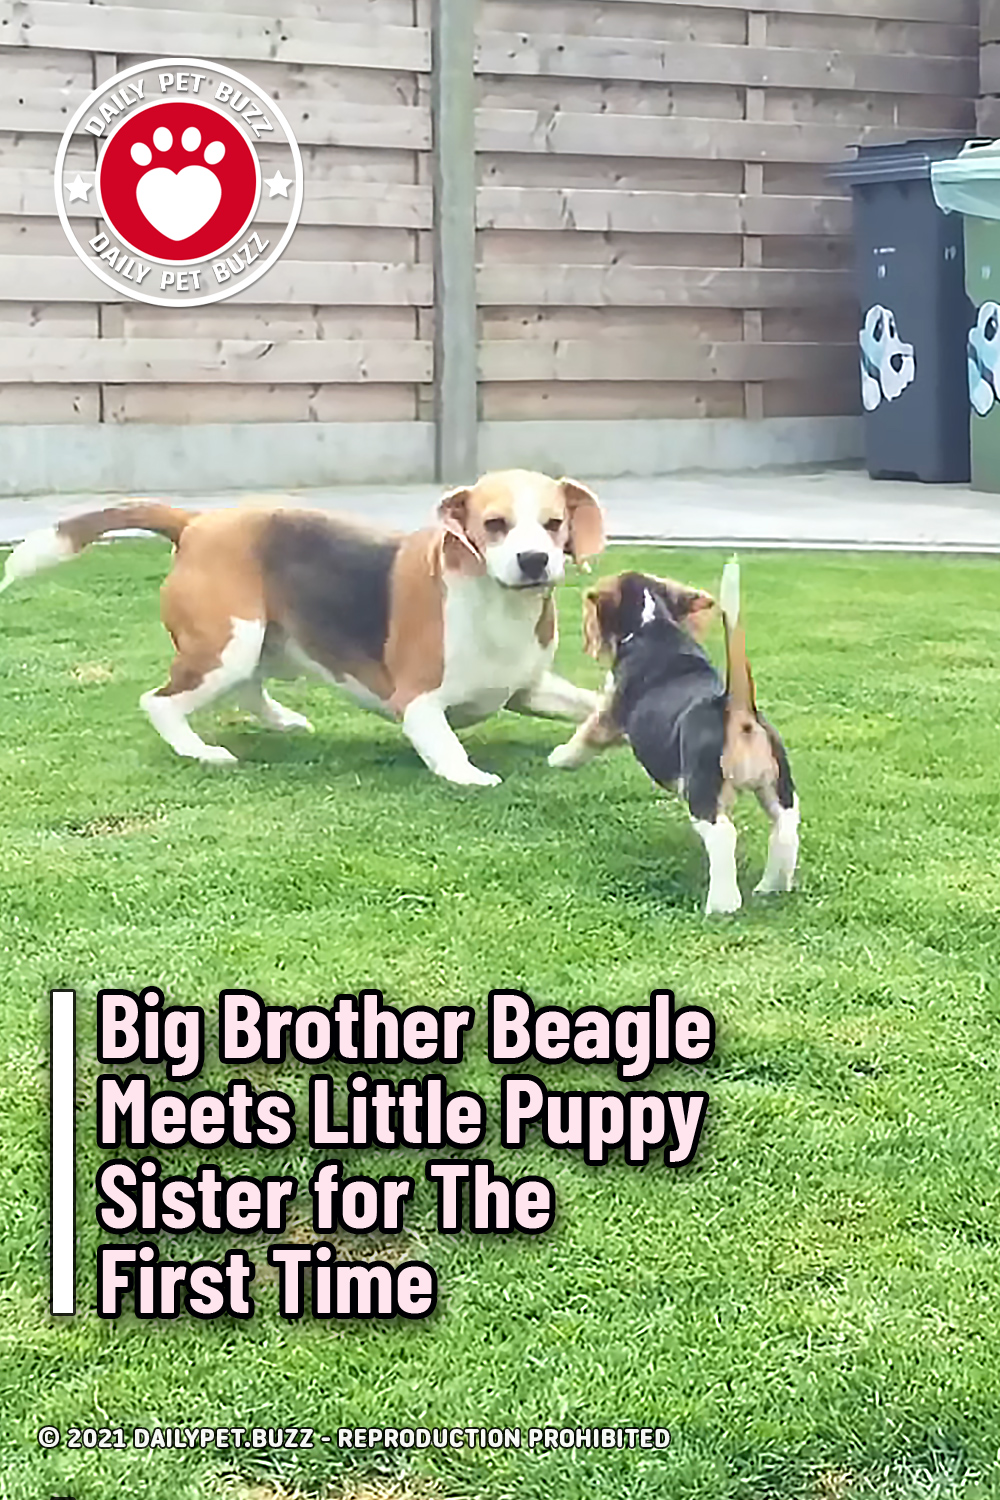 Big Brother Beagle Meets Little Puppy Sister for The First Time